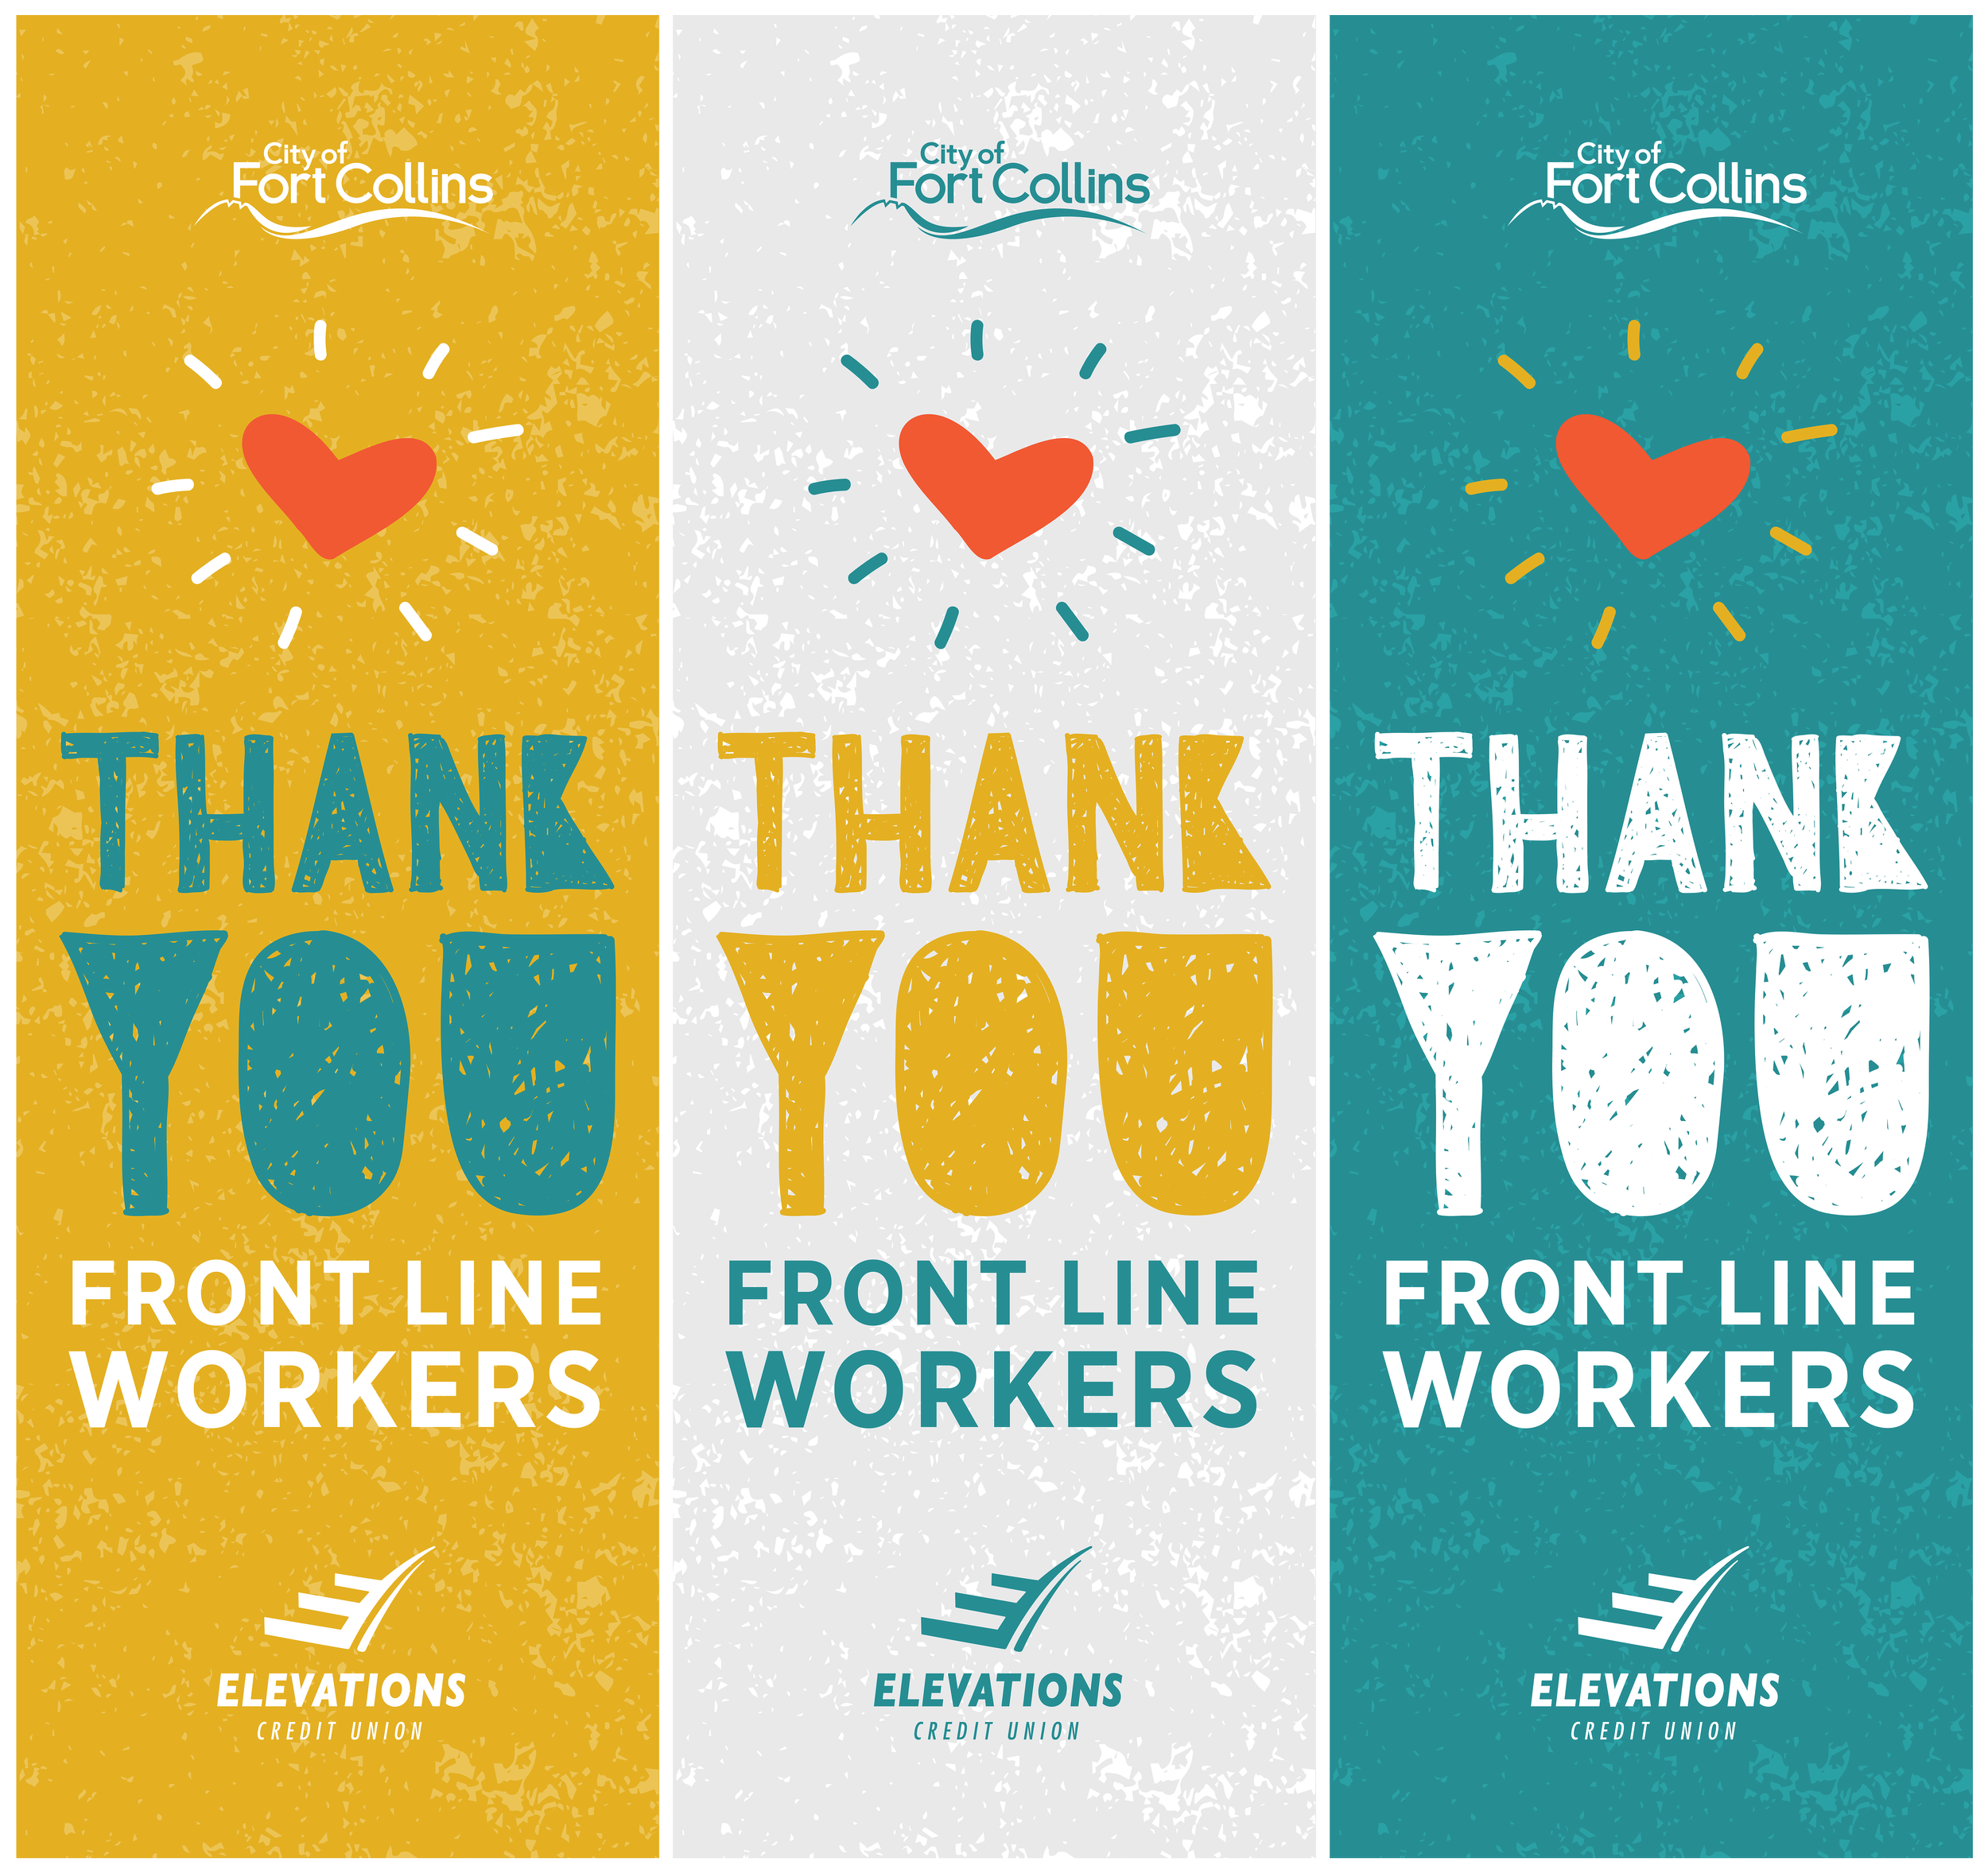 'Thank You Front Line Workers' Banners - Campaign